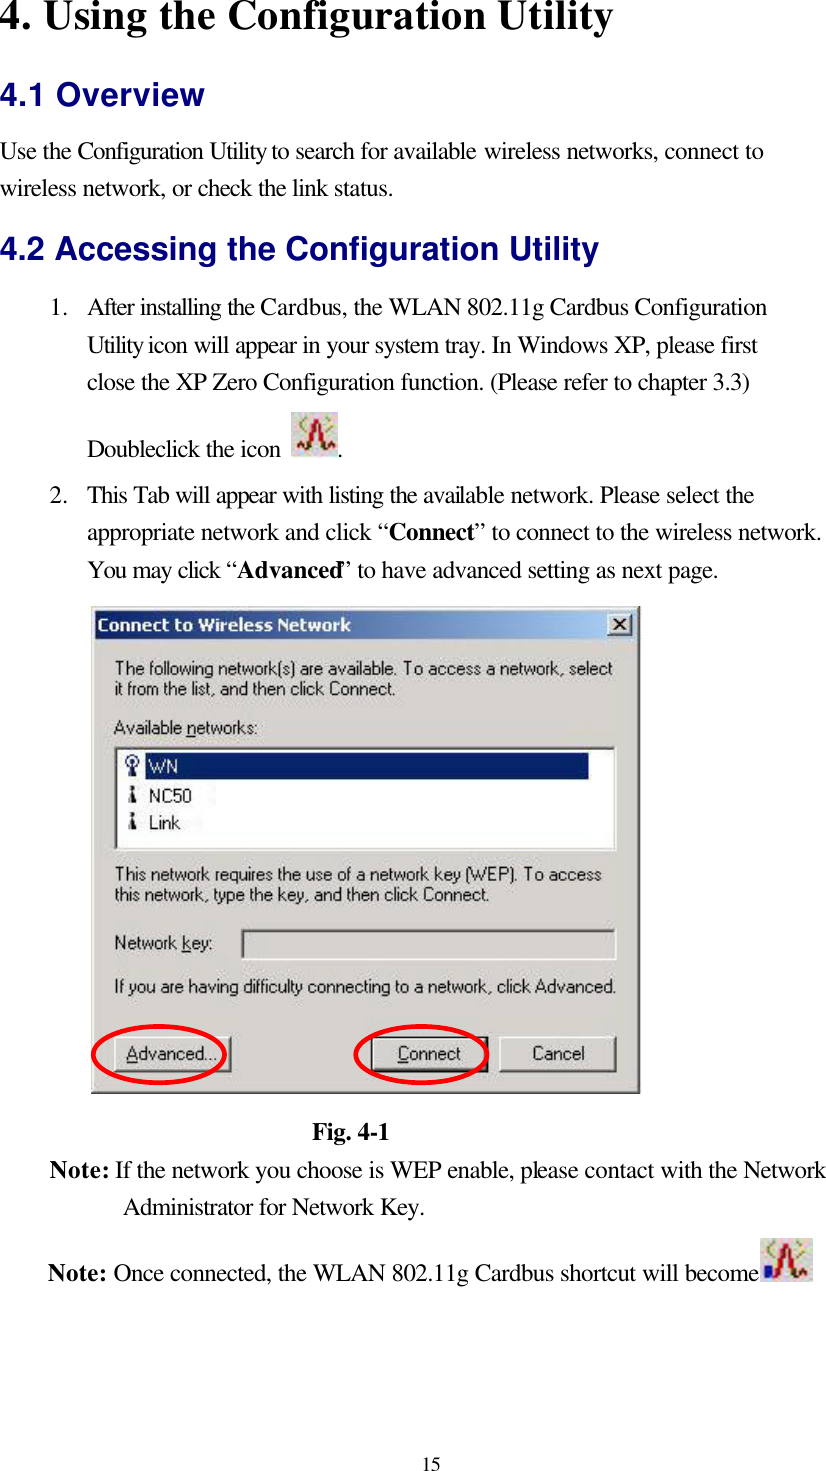  15 4. Using the Configuration Utility 4.1 Overview Use the Configuration Utility to search for available wireless networks, connect to wireless network, or check the link status. 4.2 Accessing the Configuration Utility 1.  After installing the Cardbus, the WLAN 802.11g Cardbus Configuration Utility icon will appear in your system tray. In Windows XP, please first close the XP Zero Configuration function. (Please refer to chapter 3.3) Doubleclick the icon  .   2.  This Tab will appear with listing the available network. Please select the appropriate network and click “Connect” to connect to the wireless network. You may click “Advanced” to have advanced setting as next page.                       Fig. 4-1 Note: If the network you choose is WEP enable, please contact with the Network Administrator for Network Key. Note: Once connected, the WLAN 802.11g Cardbus shortcut will become   